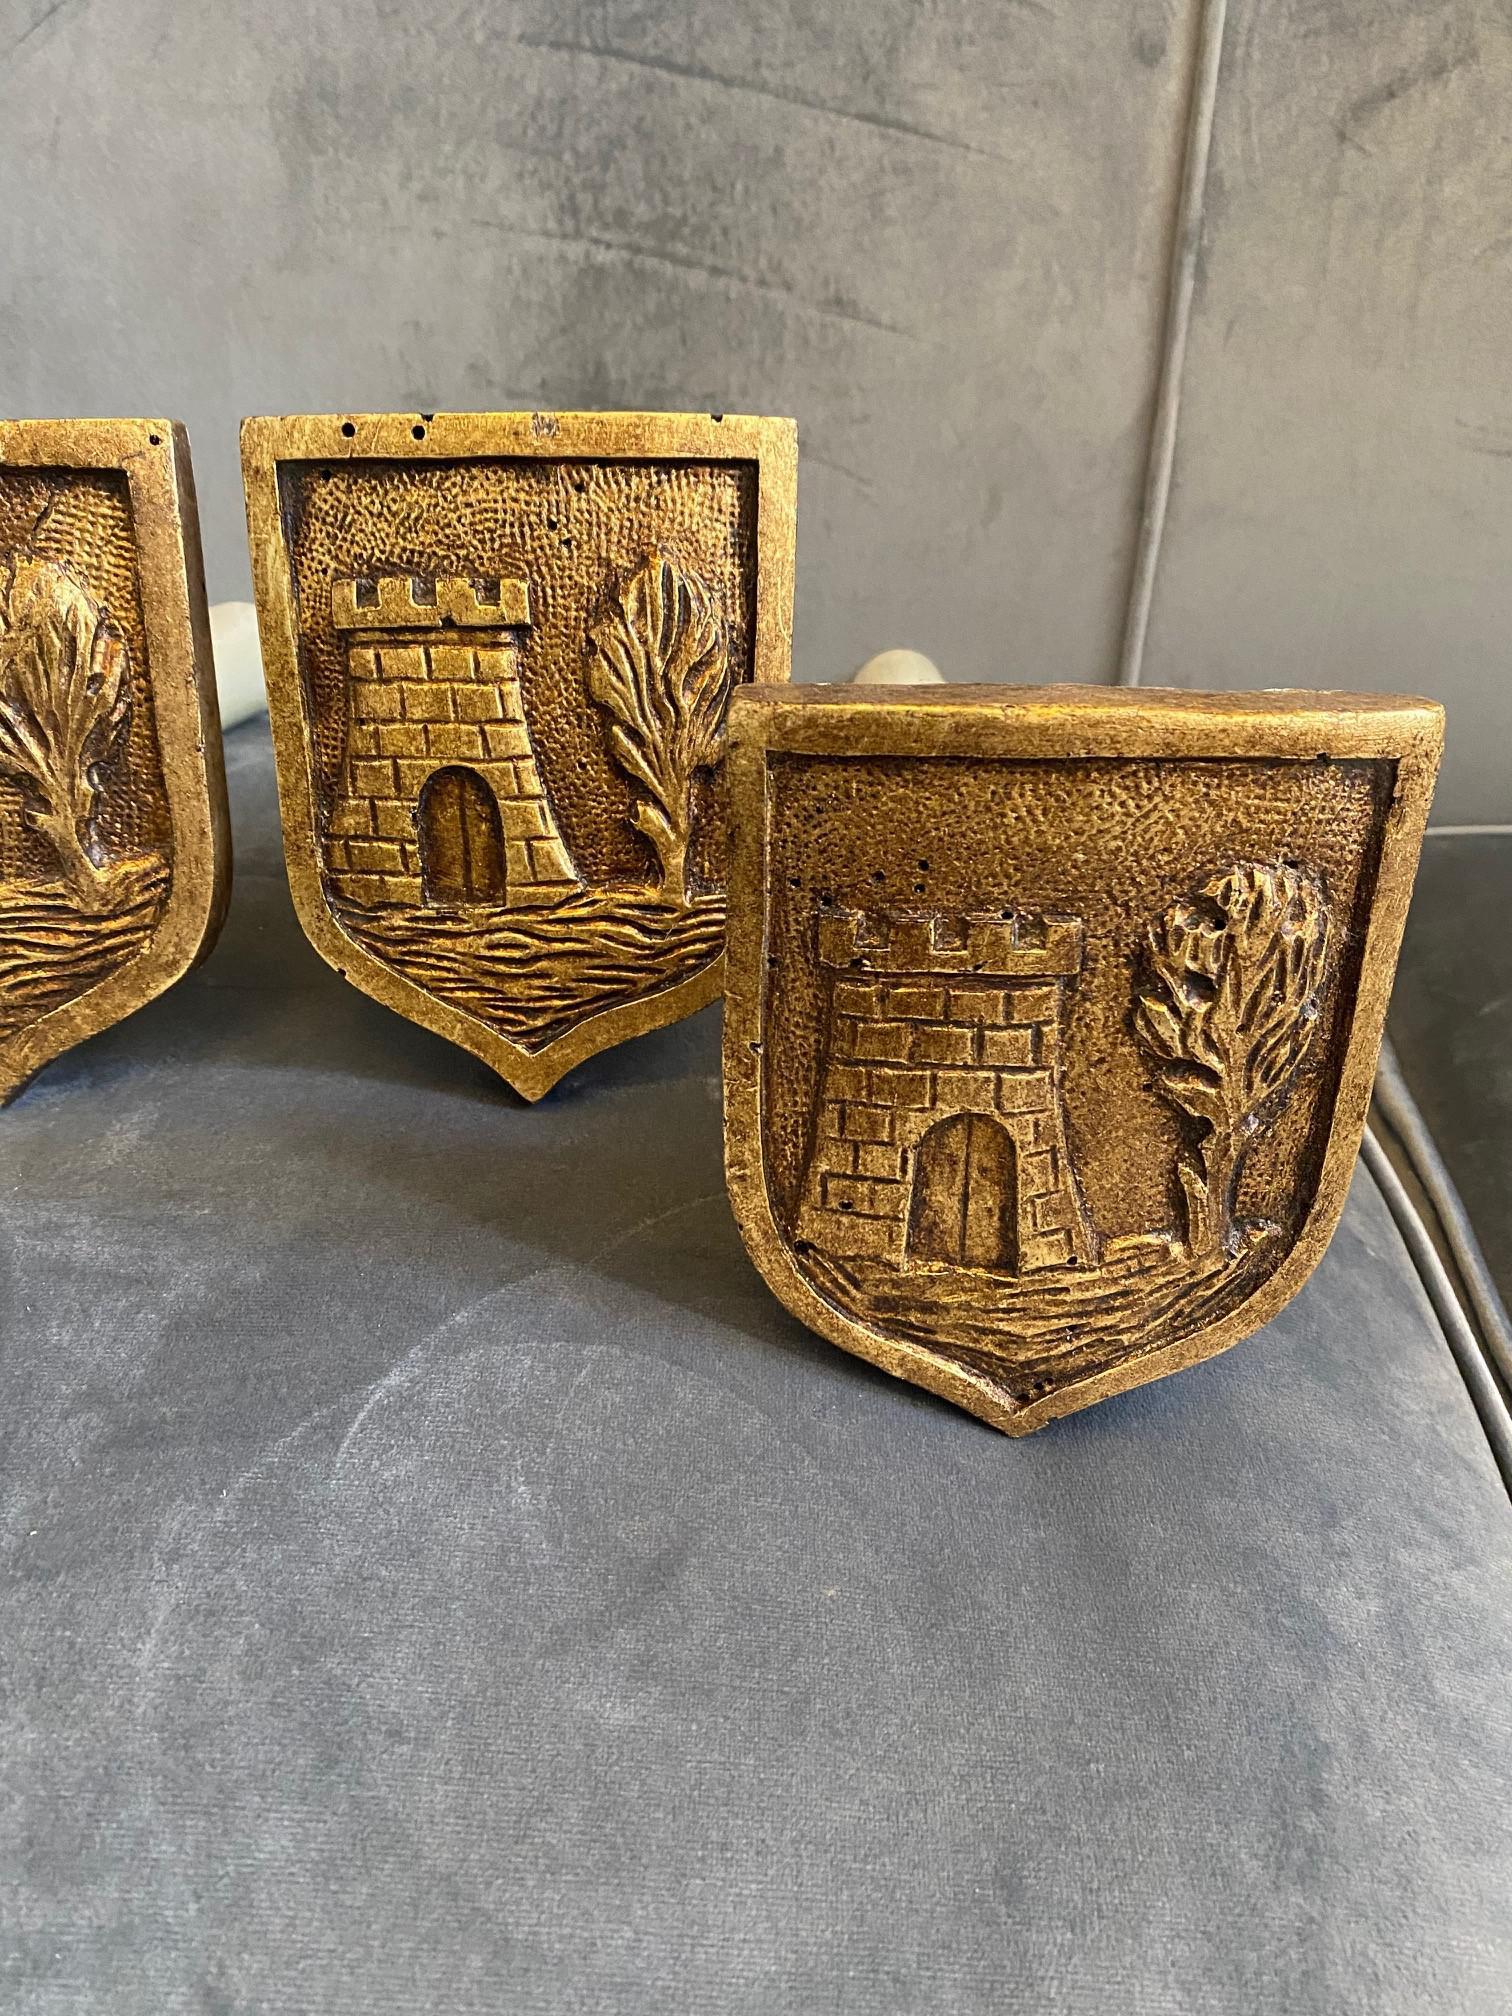 Empire Set of four Early 19th Century Golden and Lacquered Wooden Curtain Holders For Sale